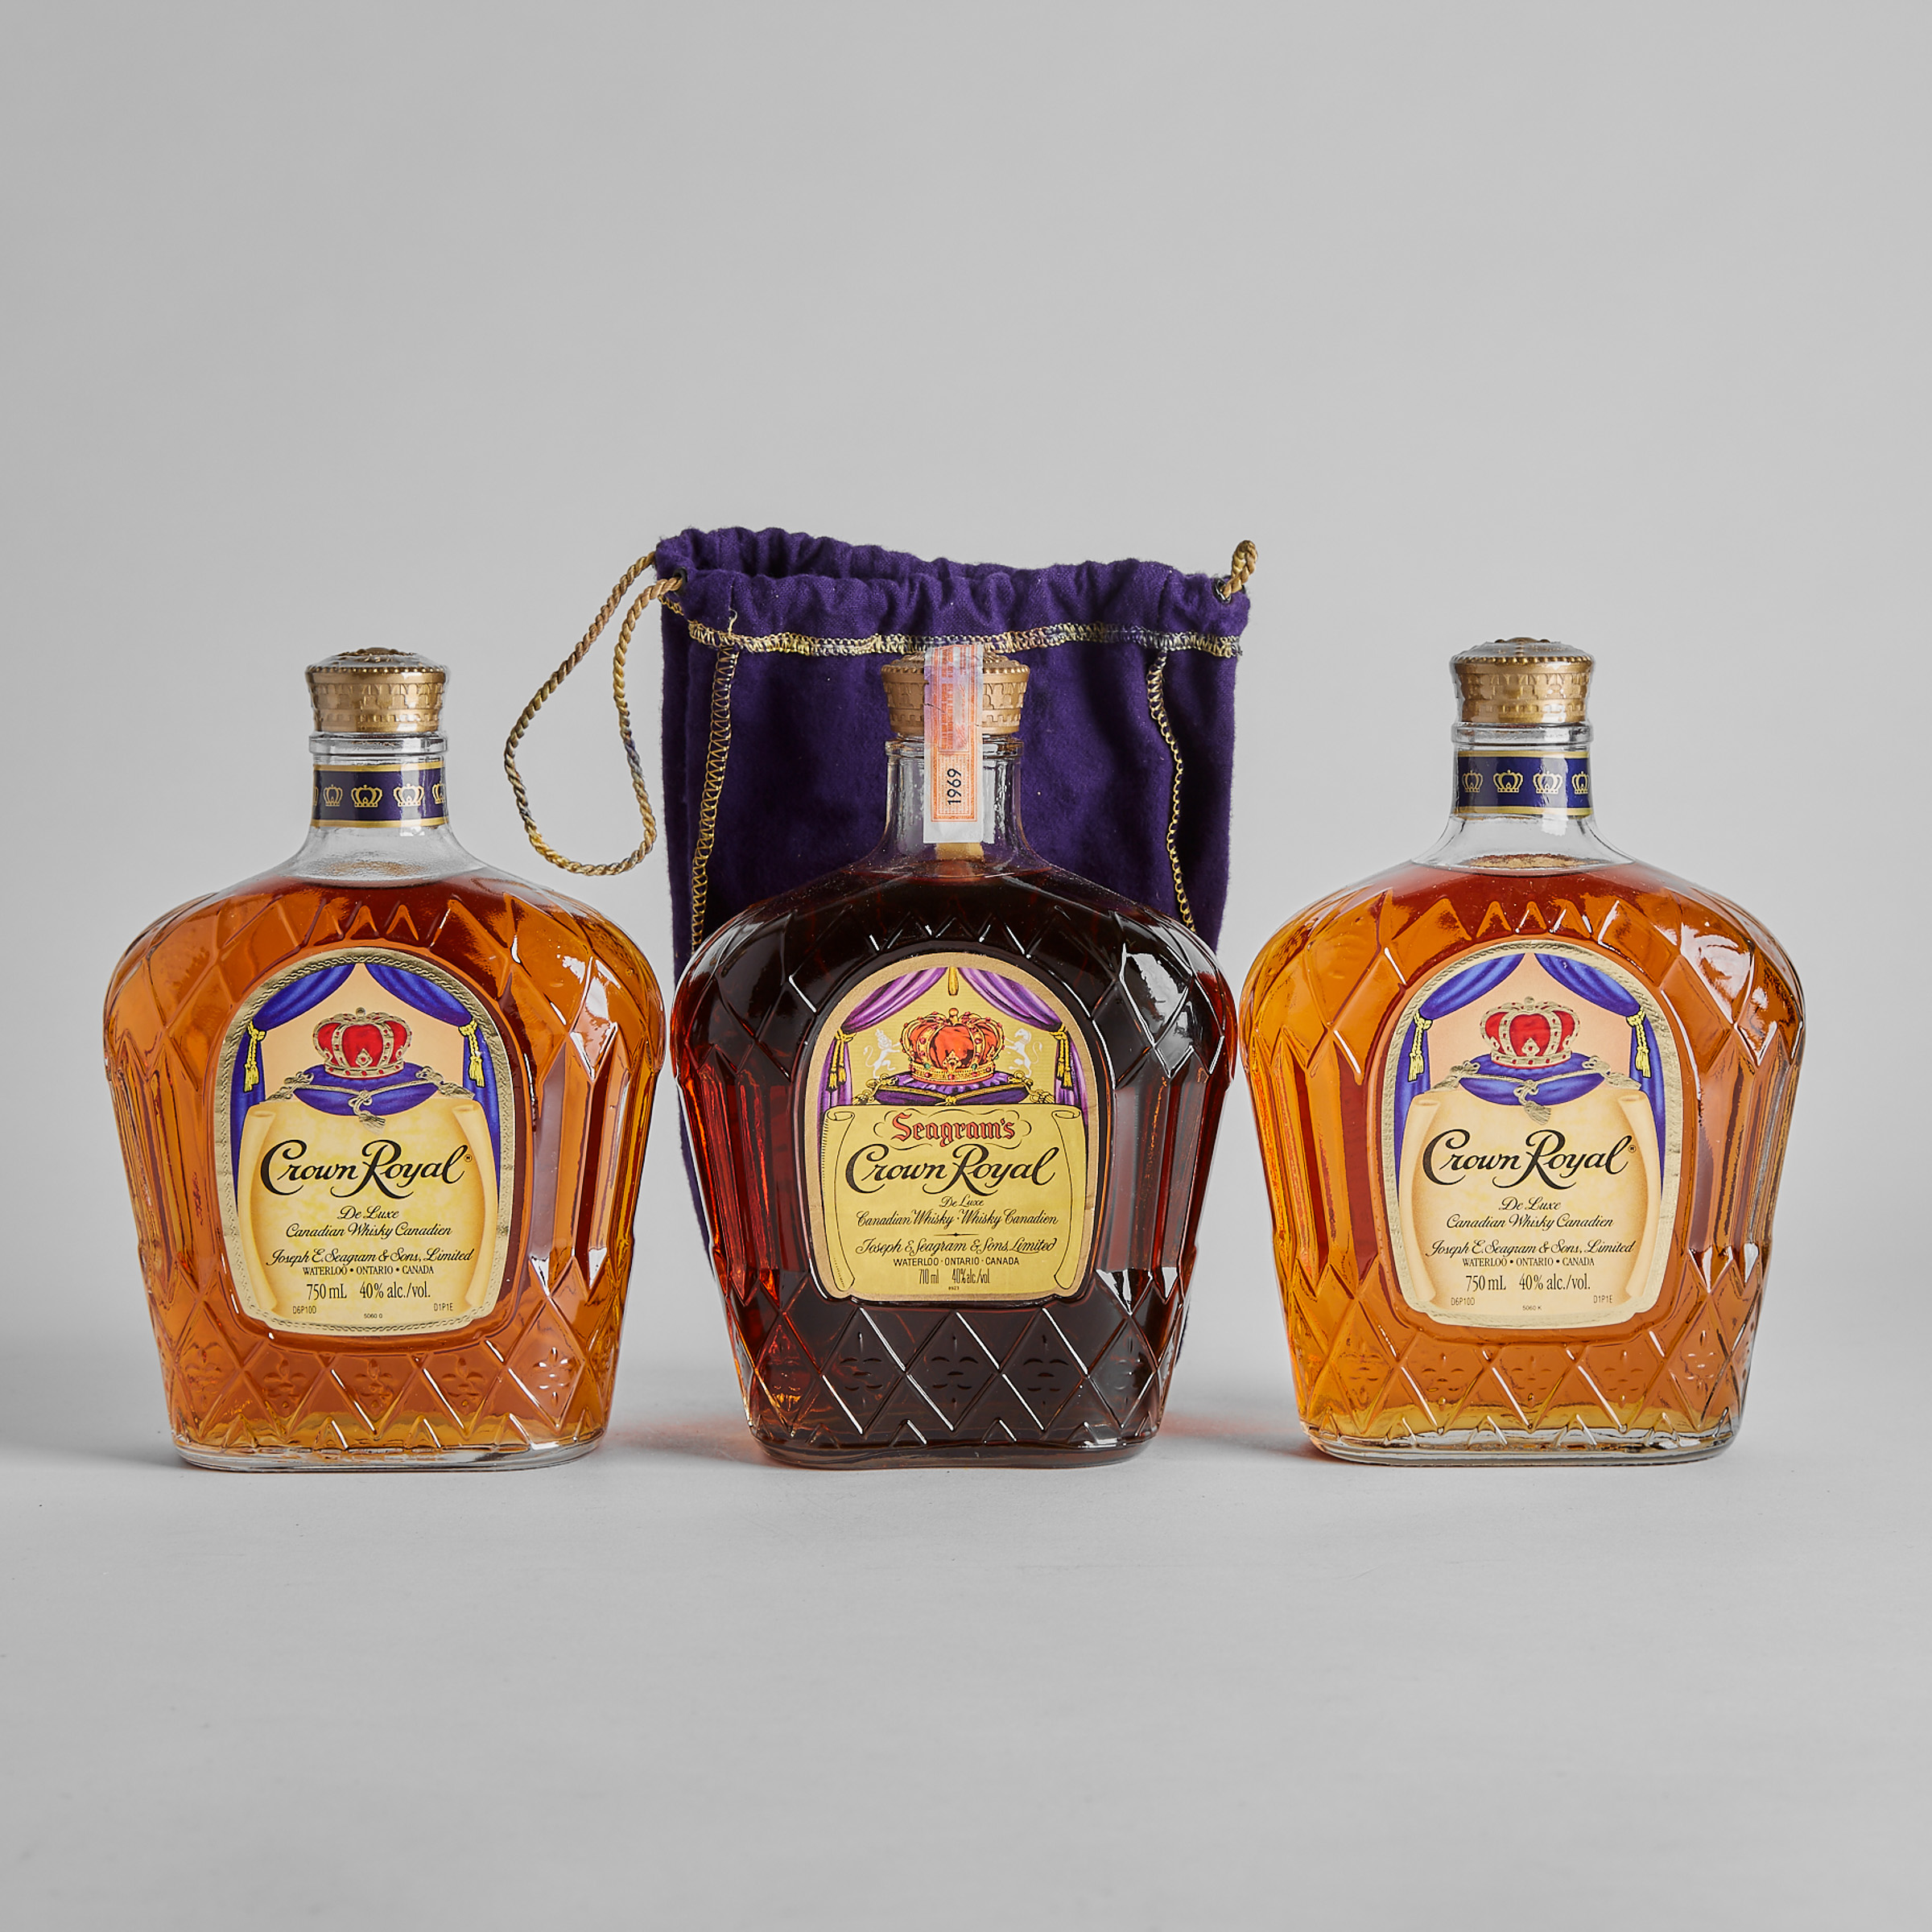 CROWN ROYAL DELUXE CANADIAN WHISKY (ONE 750 ML)
CROWN ROYAL DELUXE CANADIAN WHISKY (ONE 750 ML)
SEAGRAM’S CROWN ROYAL CANADIAN WHISKY (ONE 710 ML)